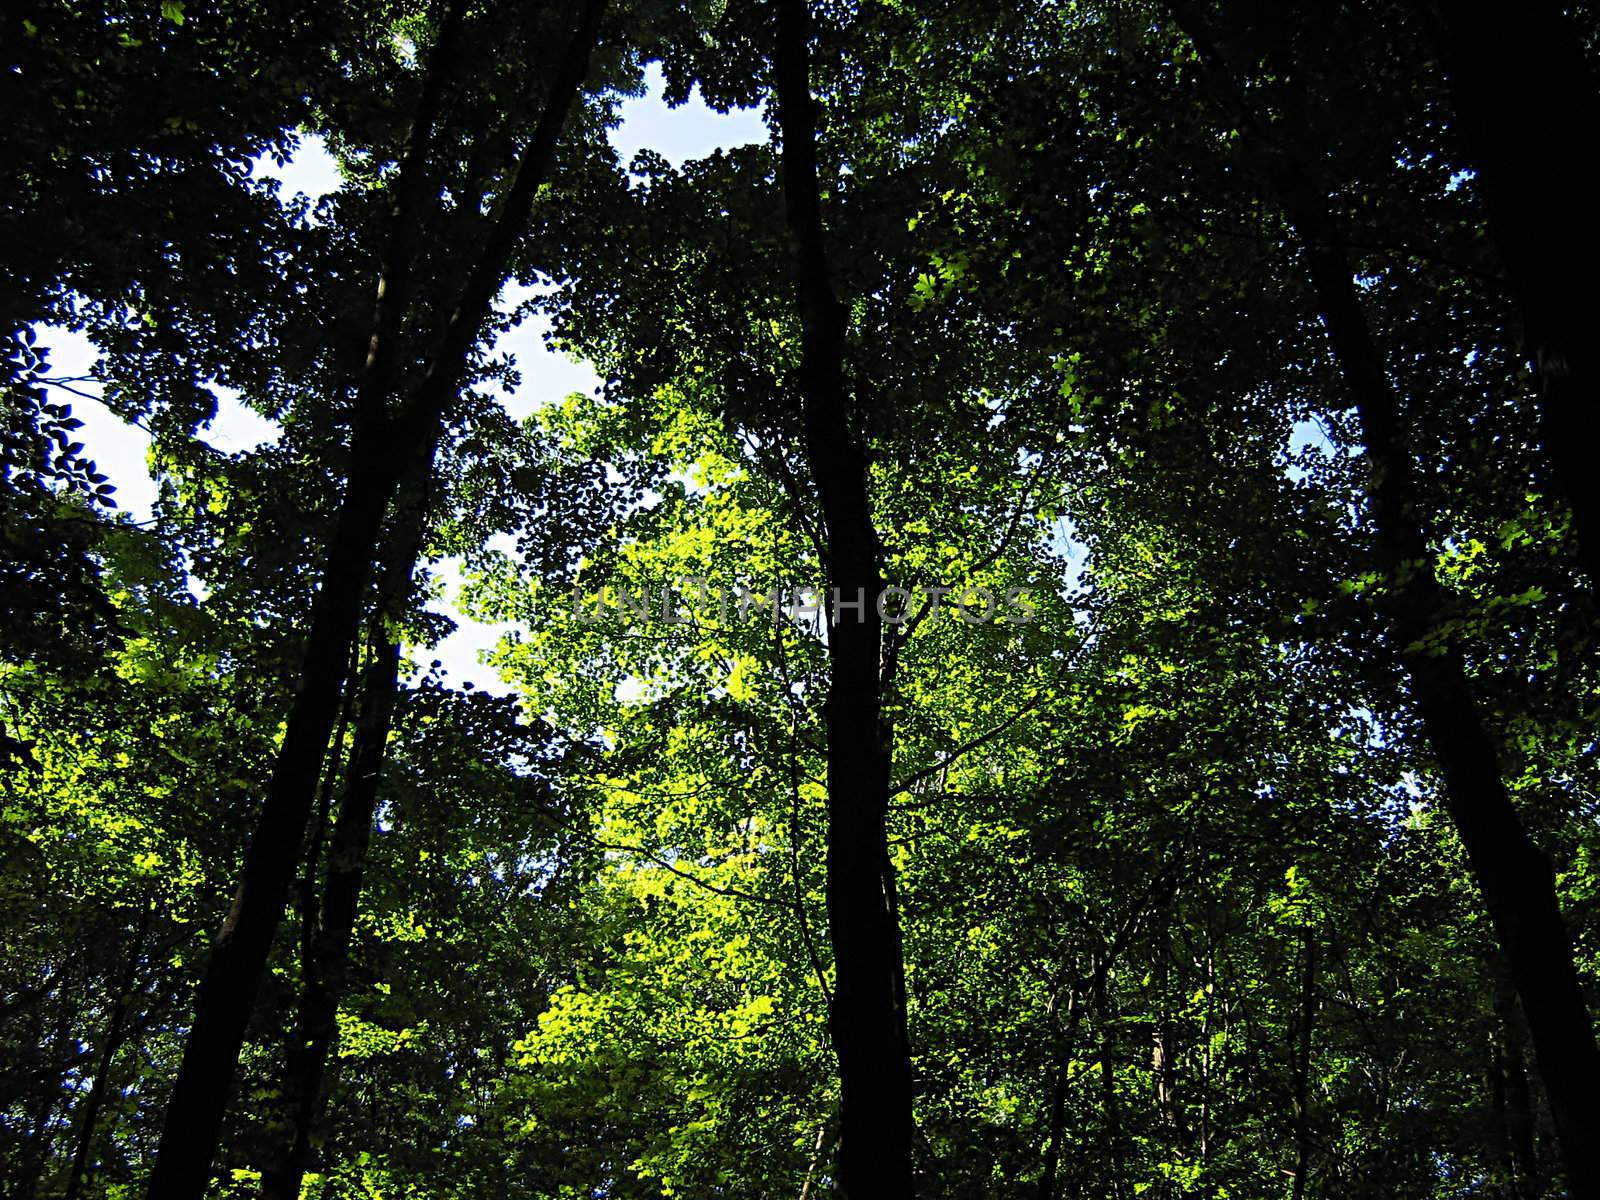 A photograph of trees detailing their foliage.